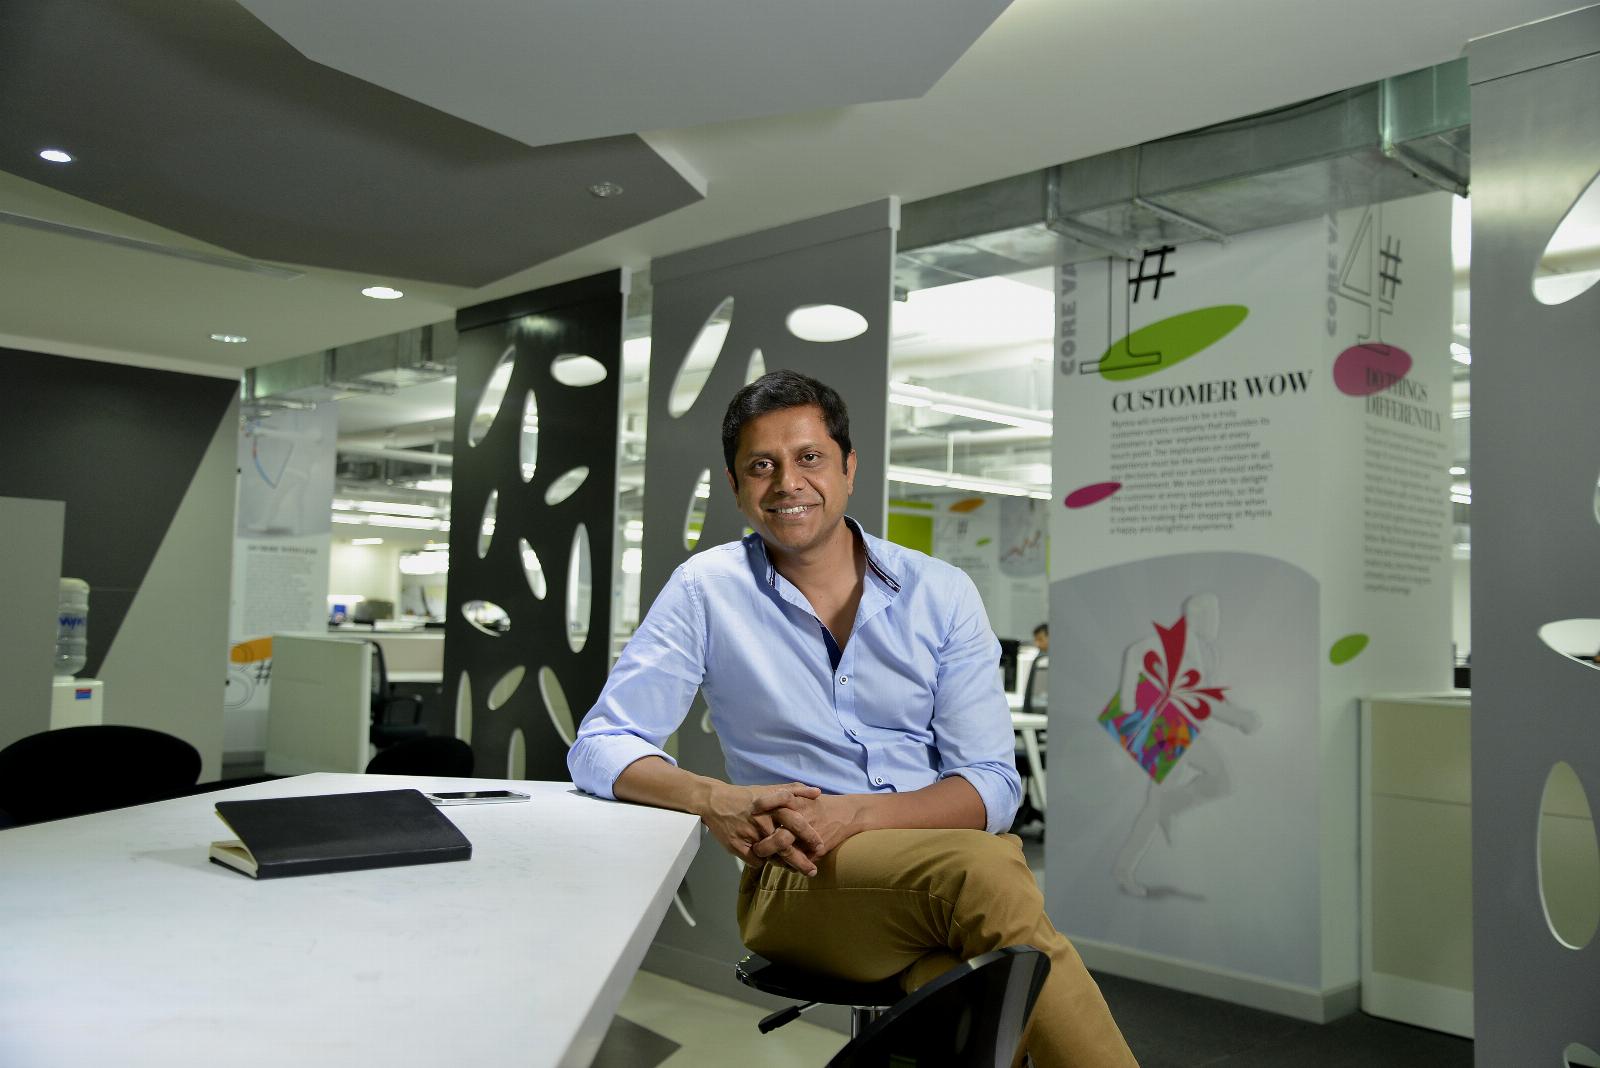 Mukesh Bansal seeks over $100M valuation in new venture’s maiden funding